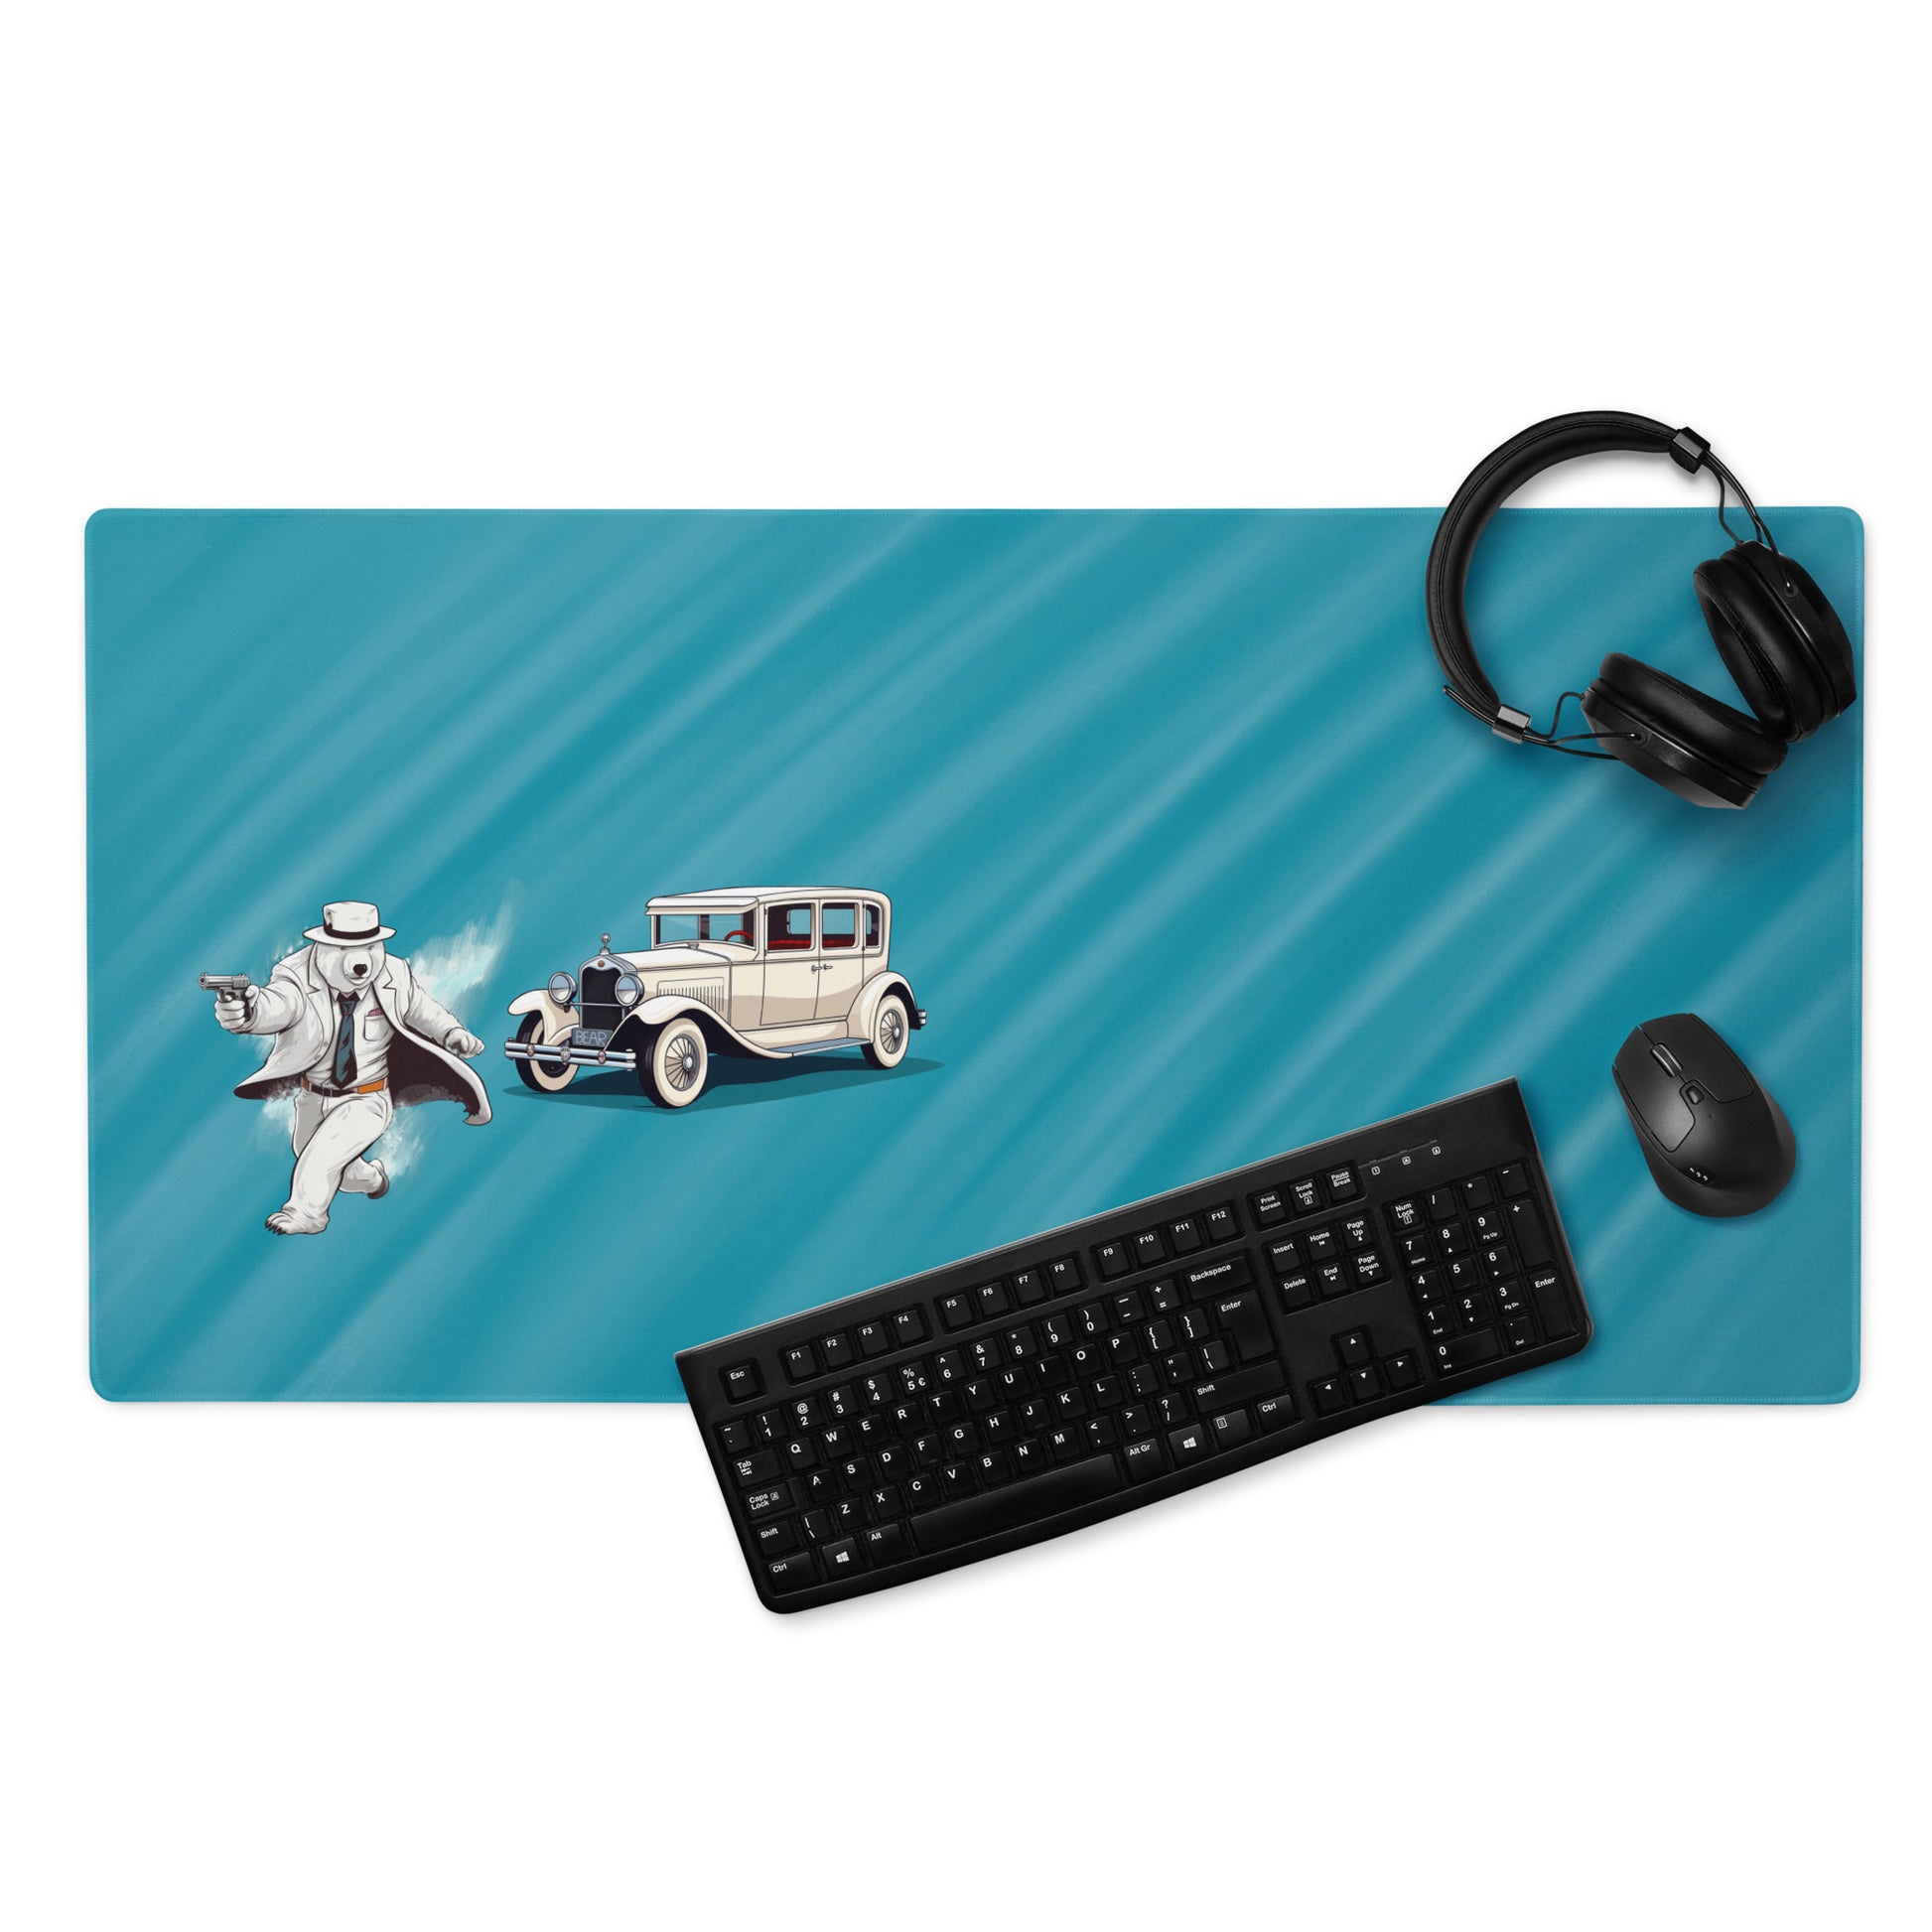 A 36" x 18" desk pad with a gangster polar bear and his car on the left displayed with headphones, a keyboard and a mouse on it. Blue in color.